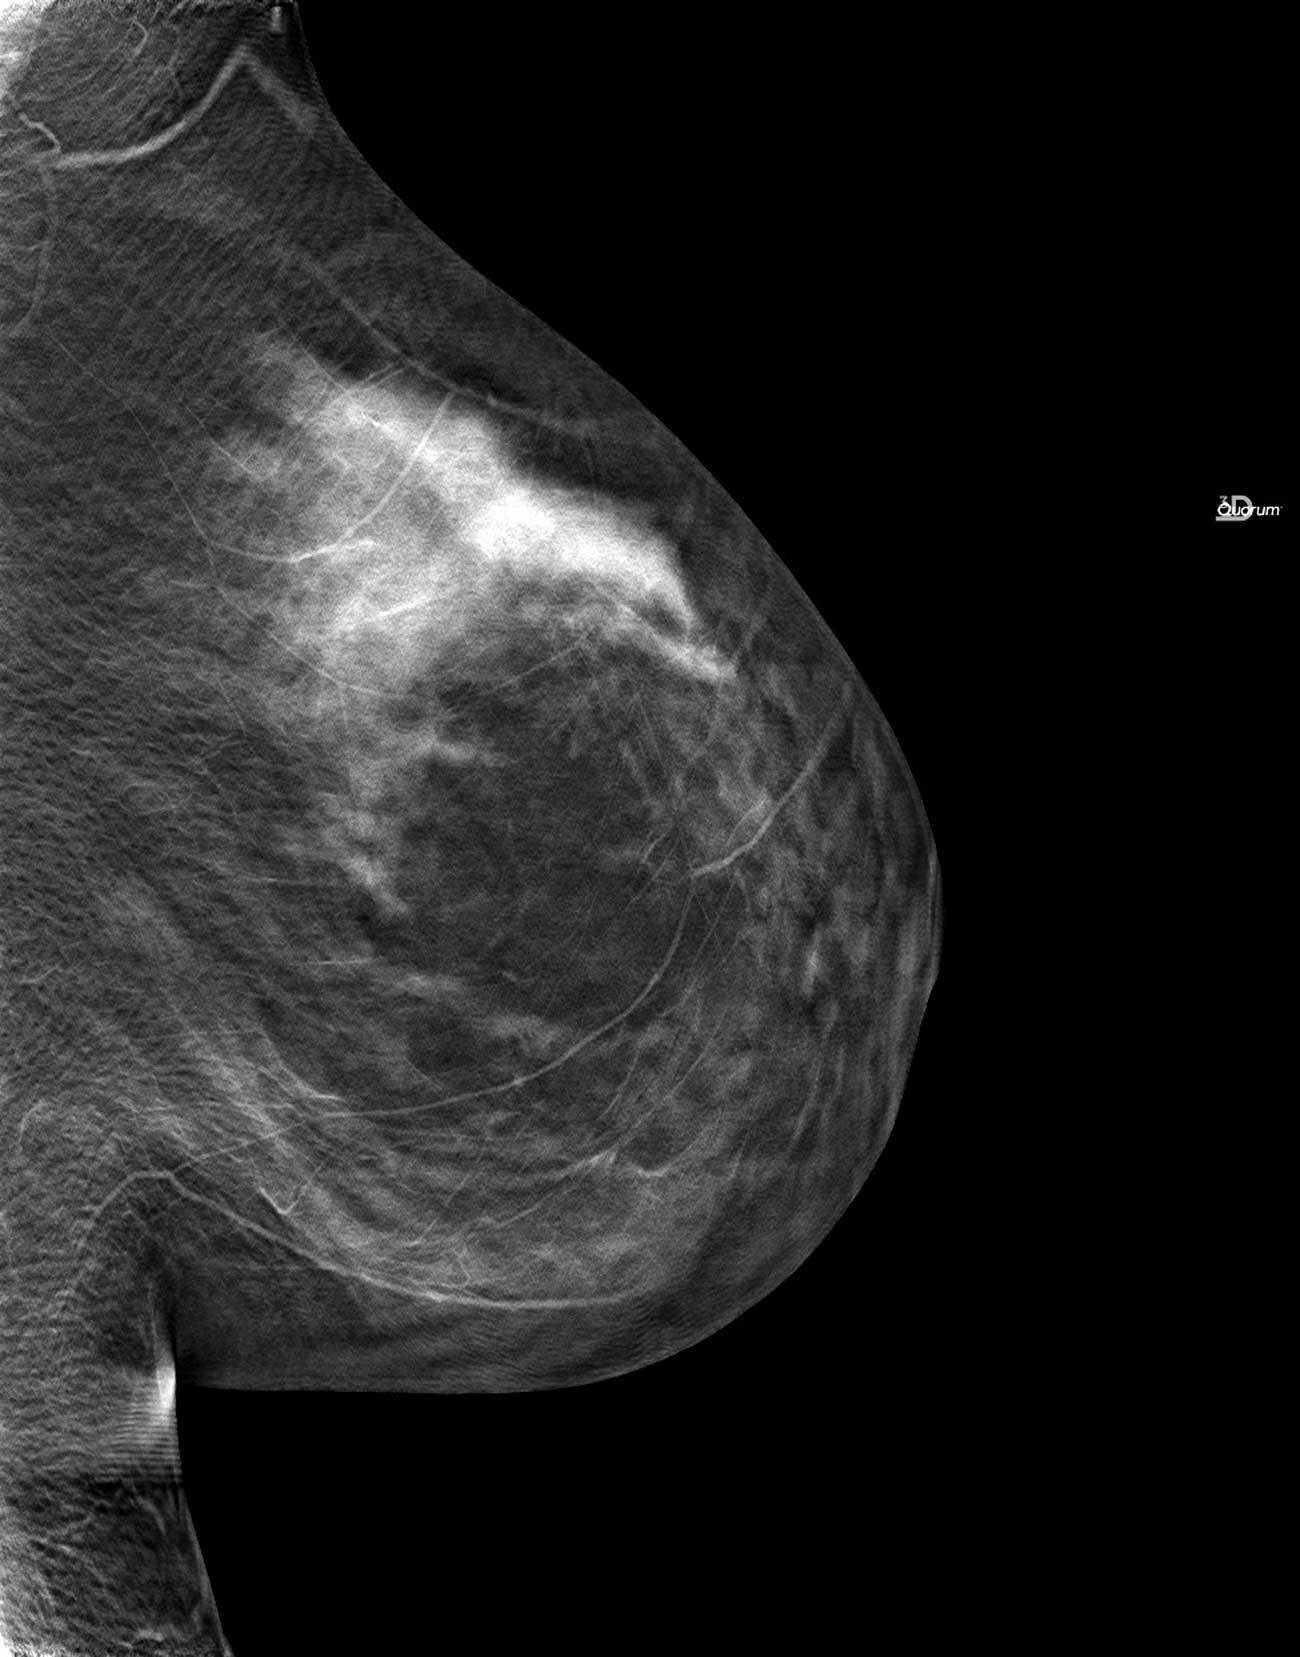 Is my ‘questionable distortion’ breast cancer? We wait.